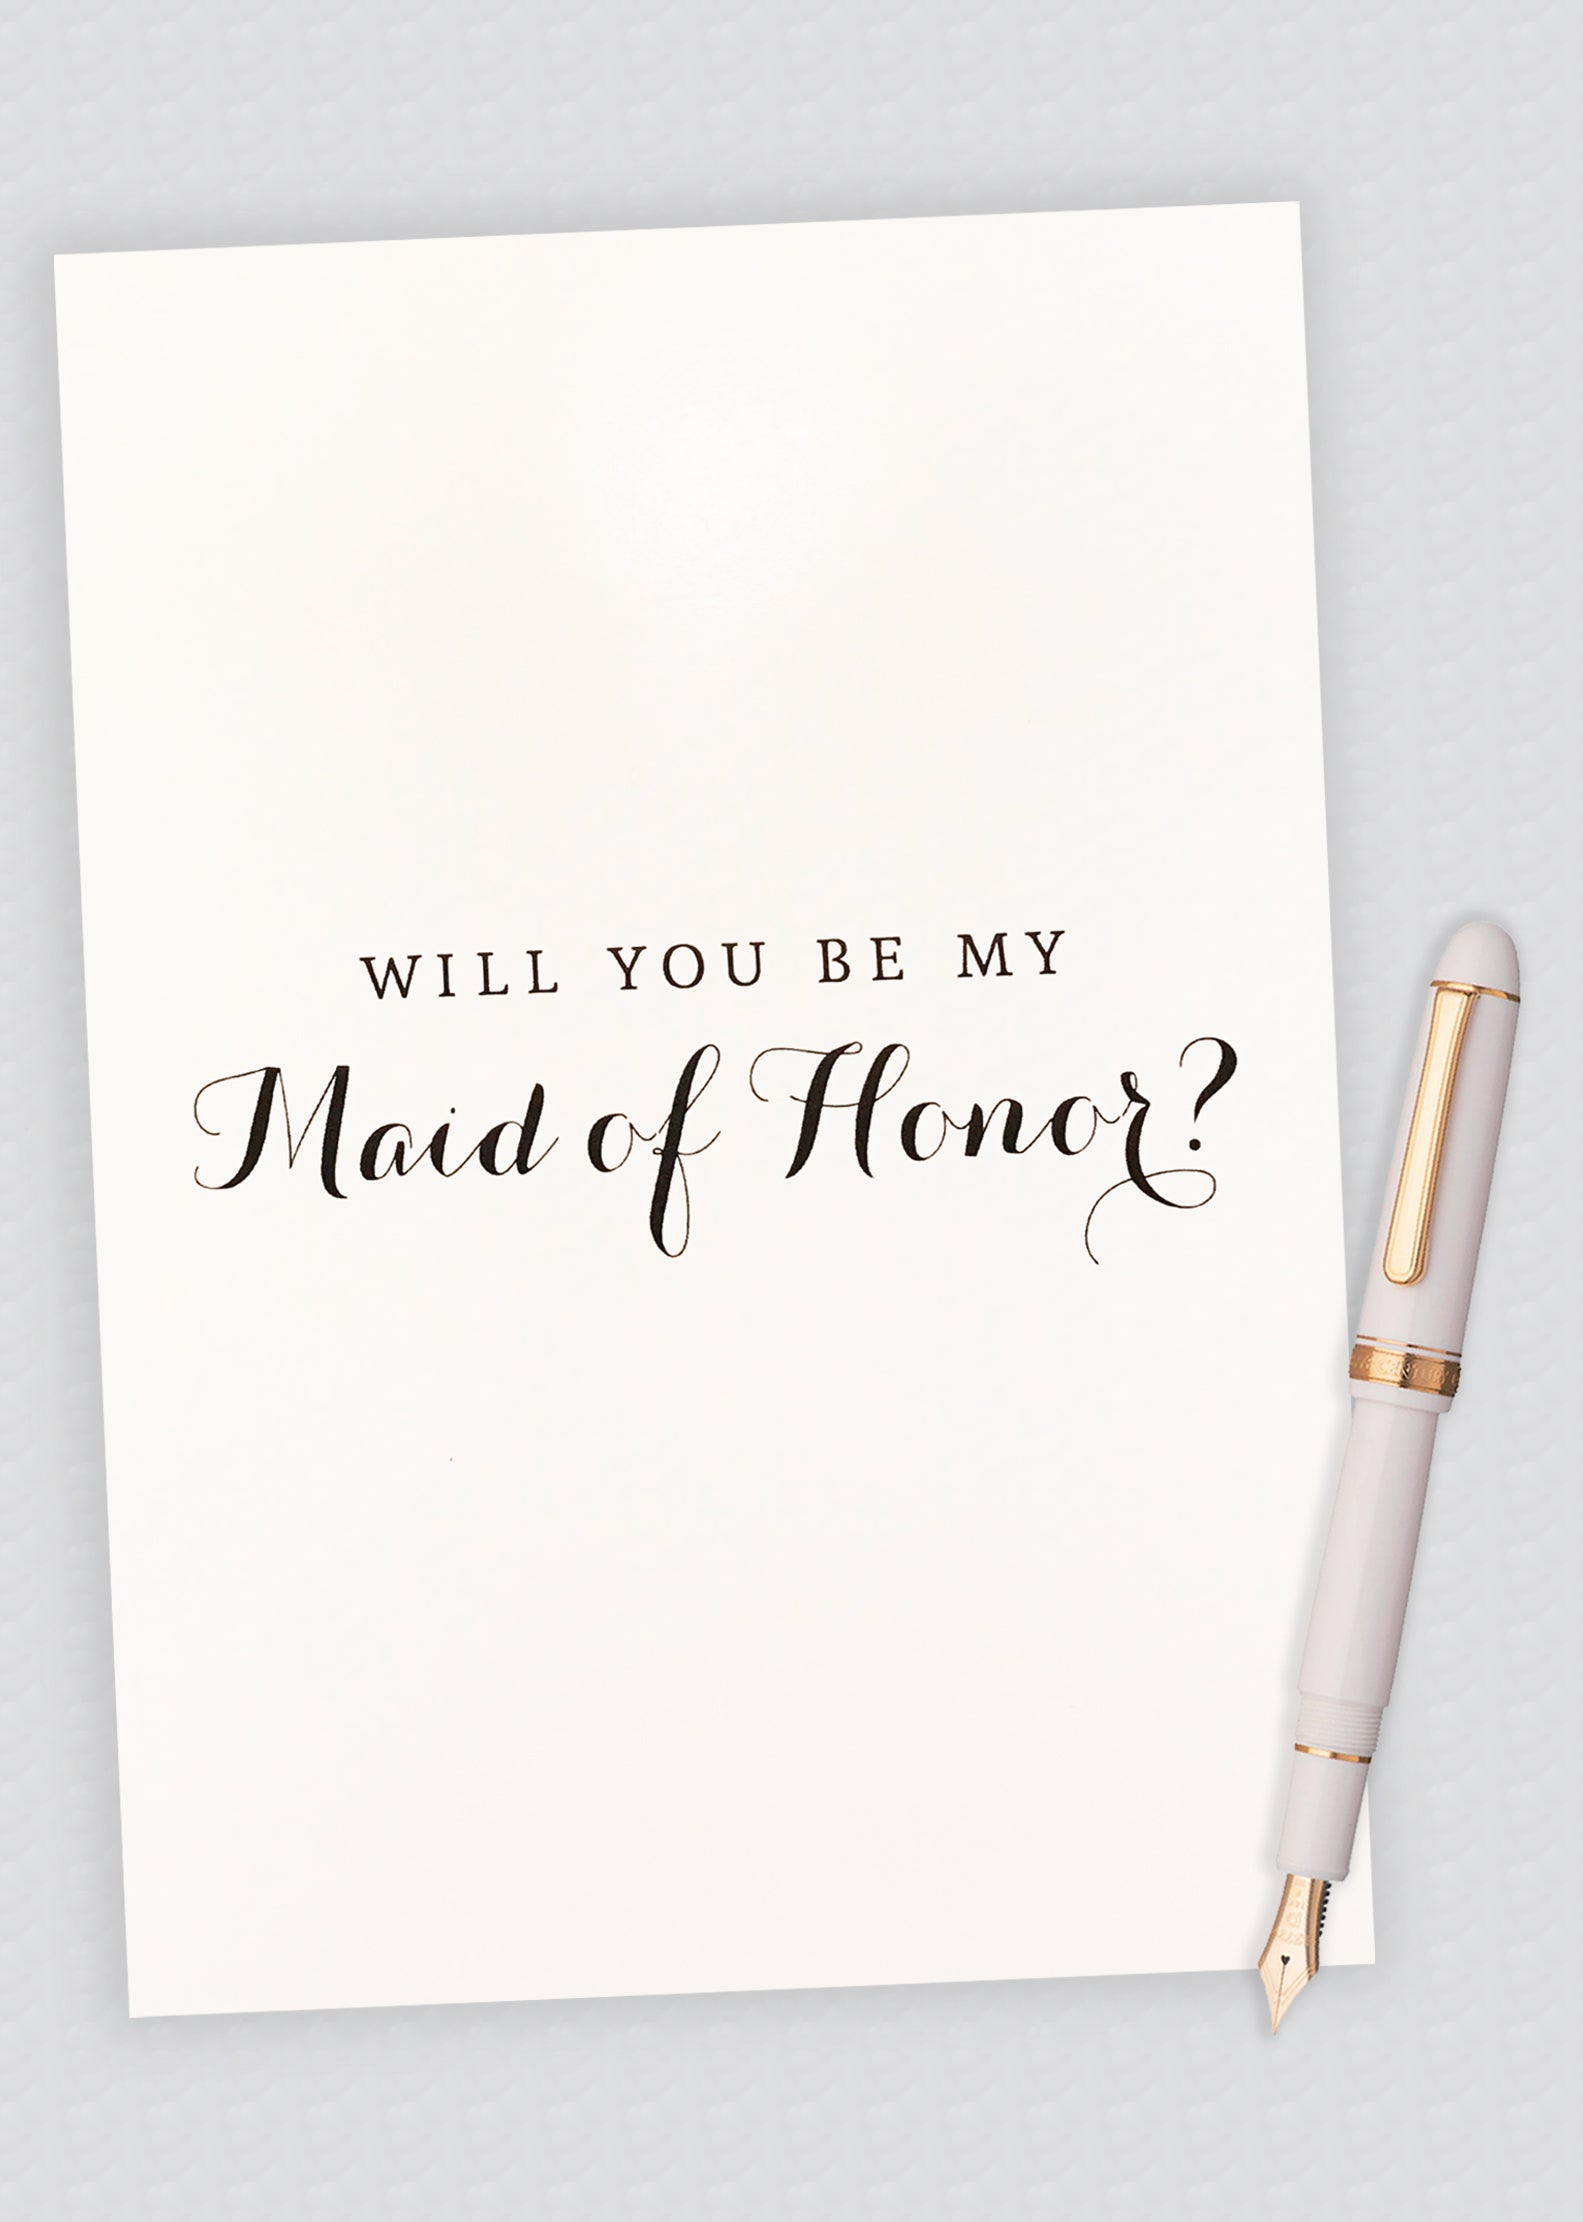 Will You Be My Maid of Honor? Proposal Card - B